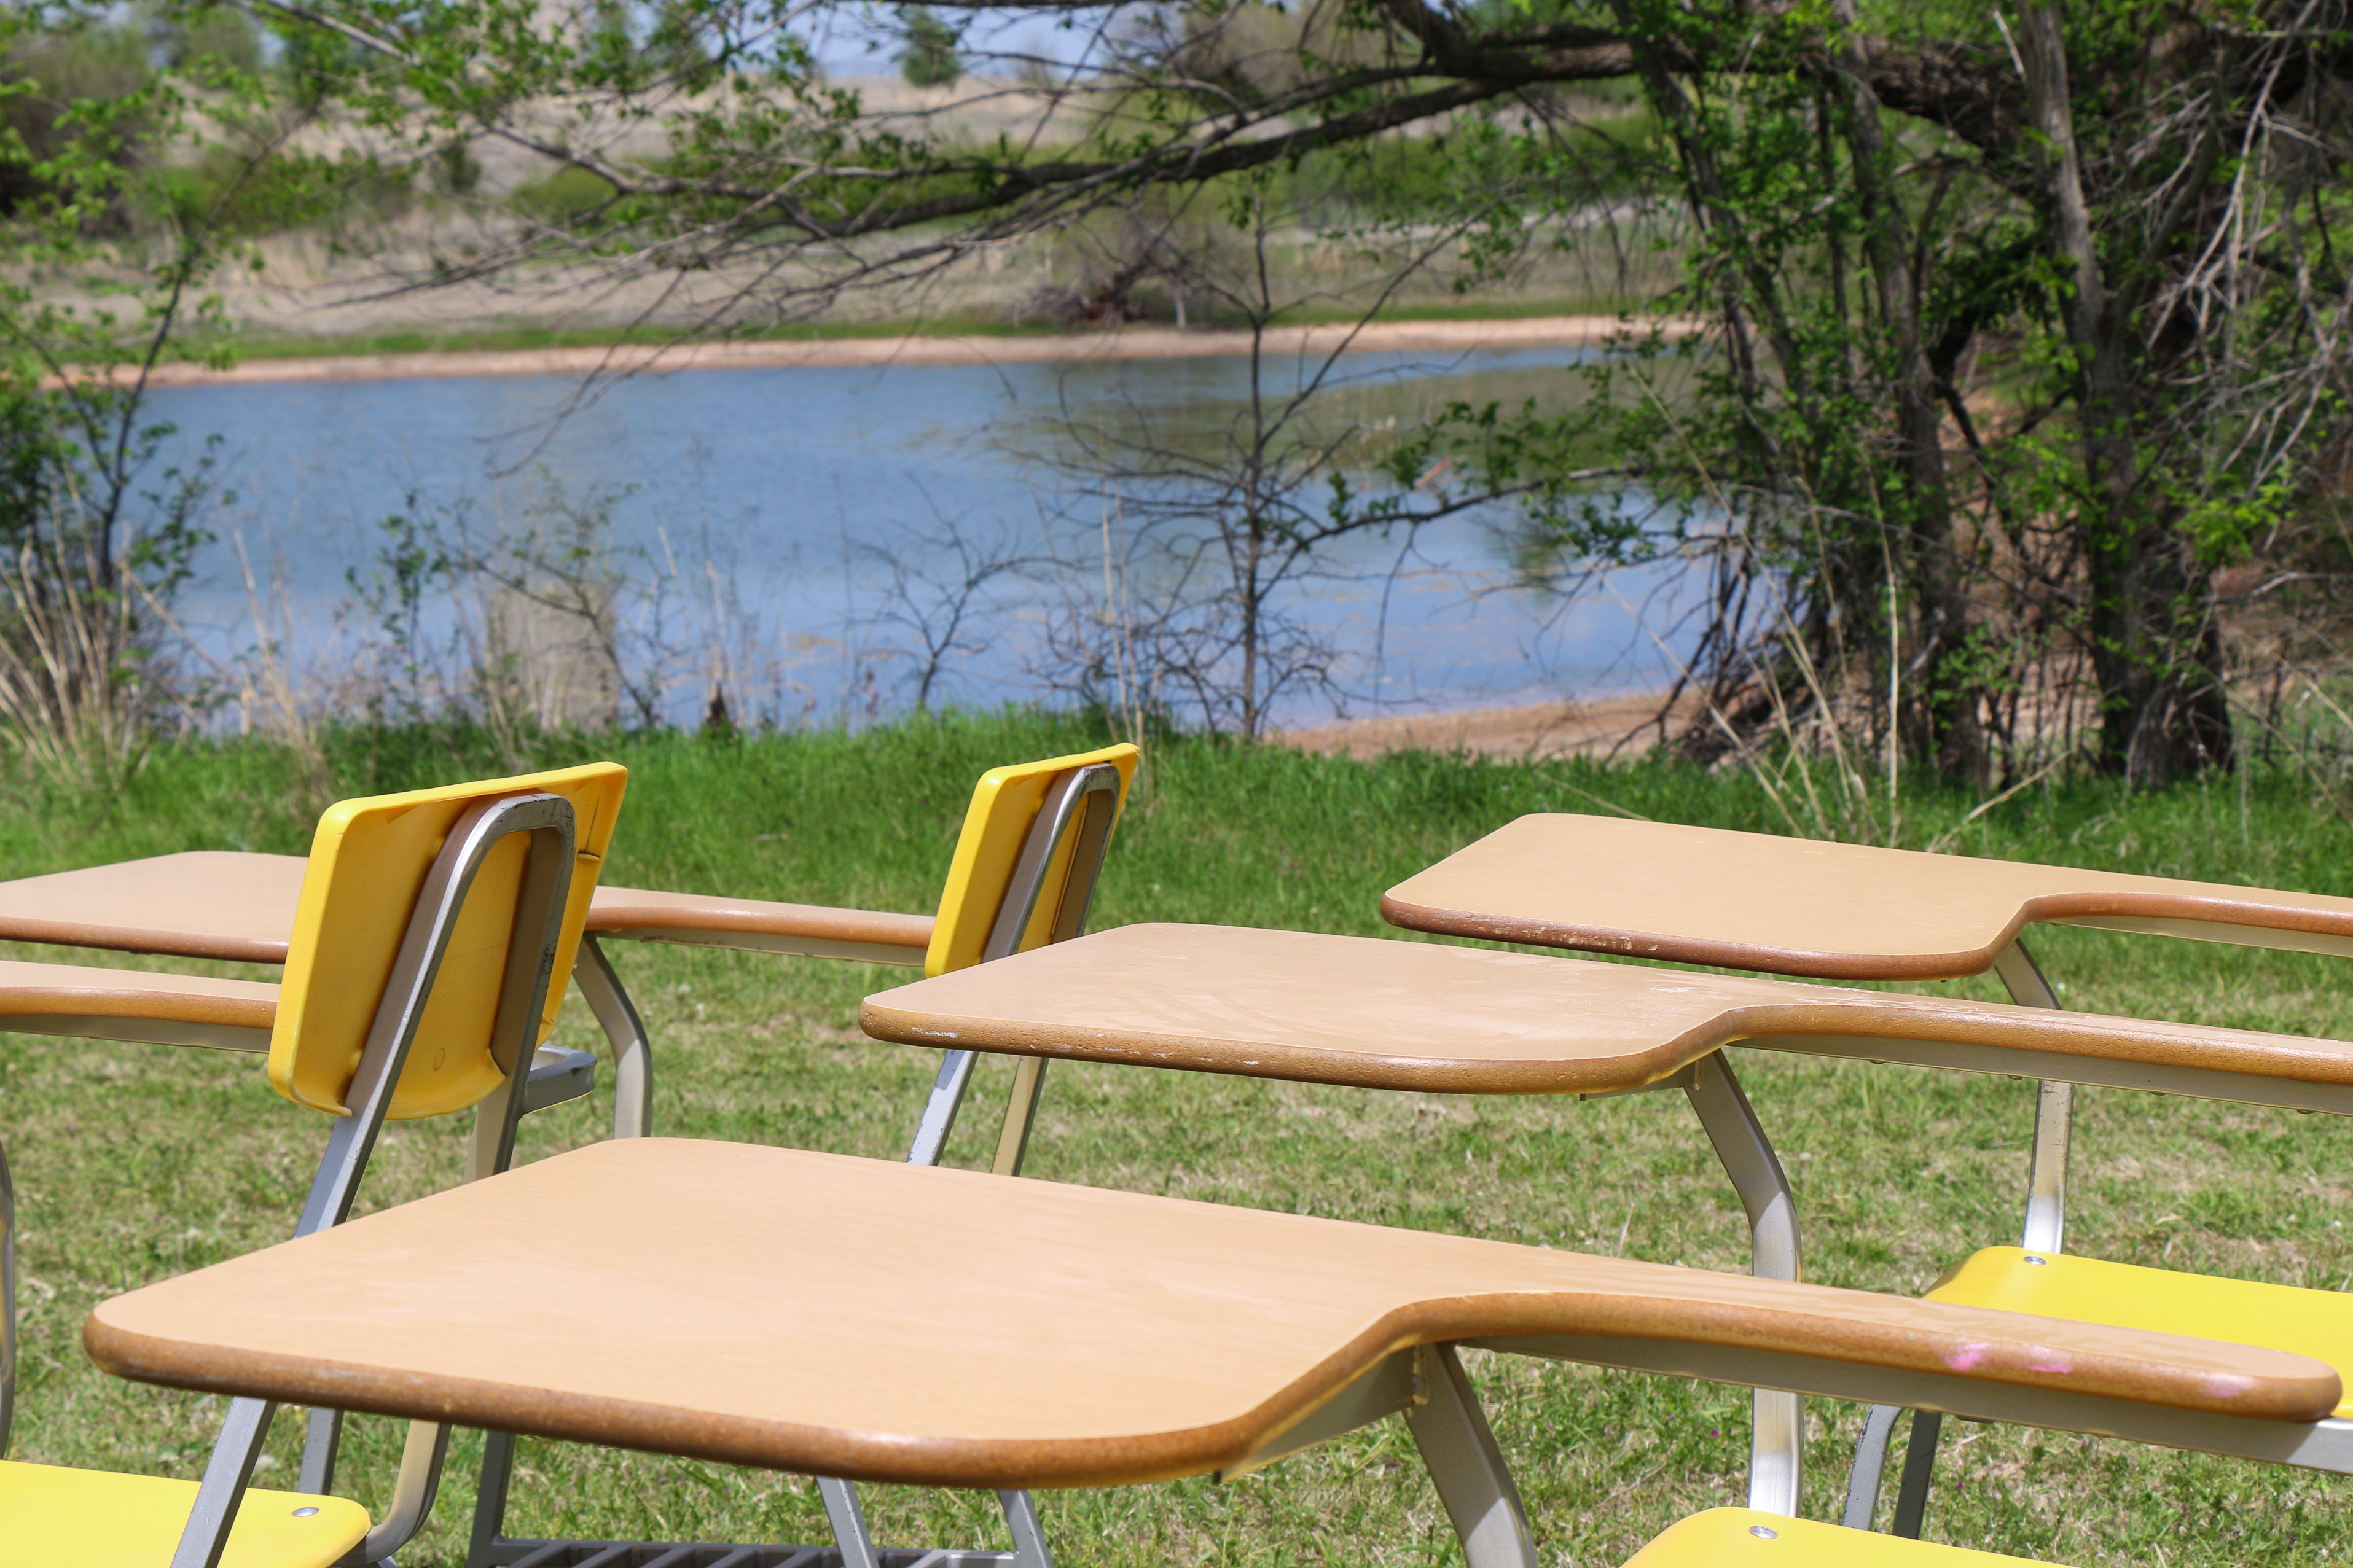 Closeup shot of desks with a pond in the background.